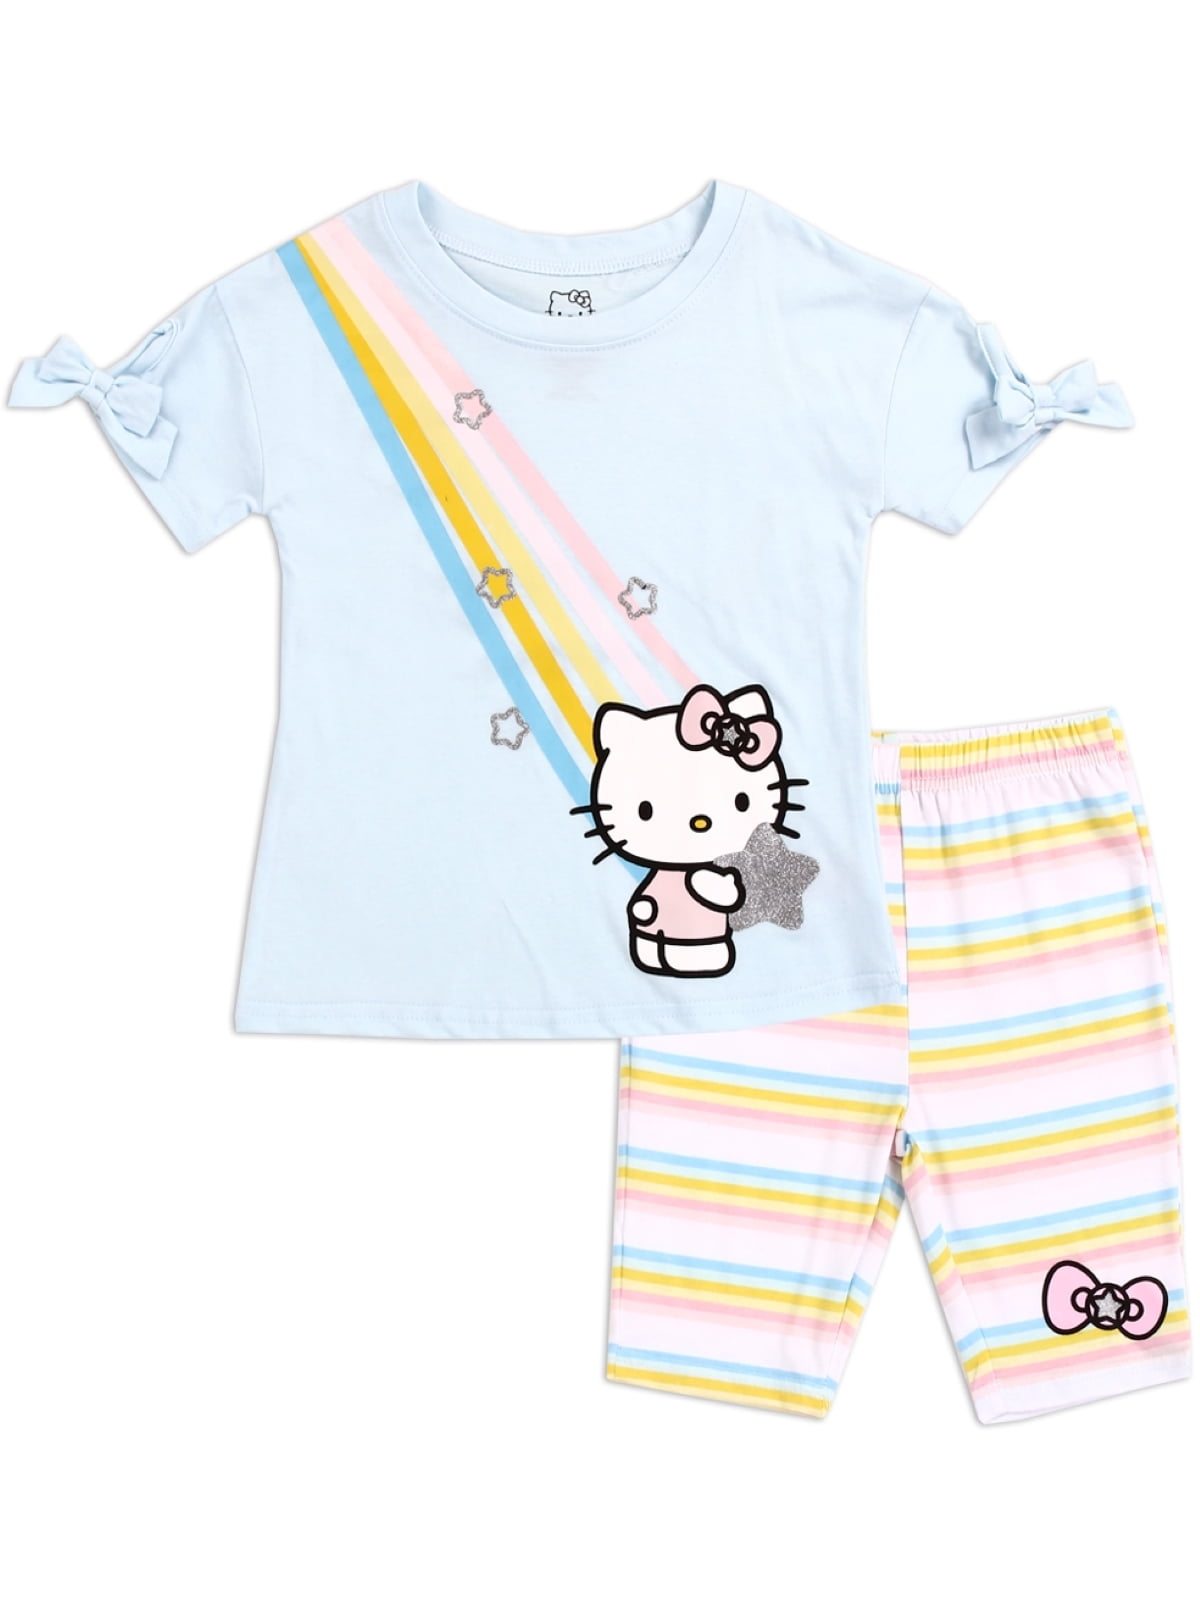 Hello Kitty girls clothing suit kids hooded jacket pants 3Set  Clothes T-shirt 